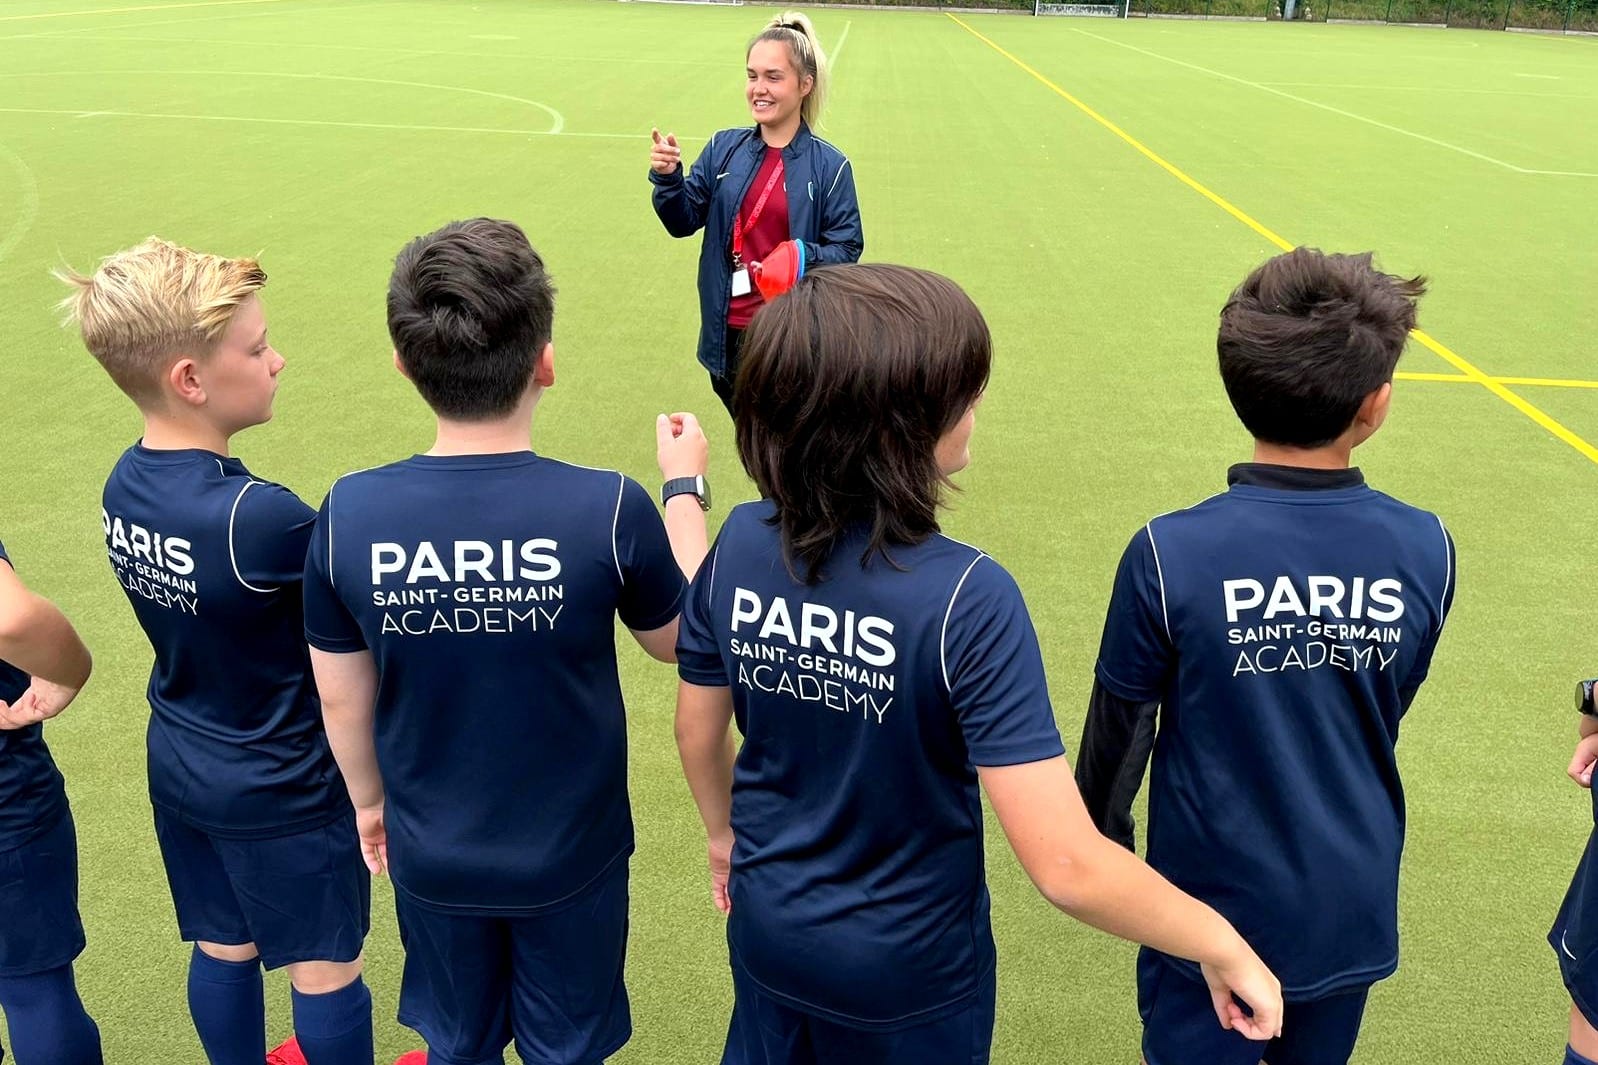 English and Football in England with the Paris Saint-Germain Academy UK